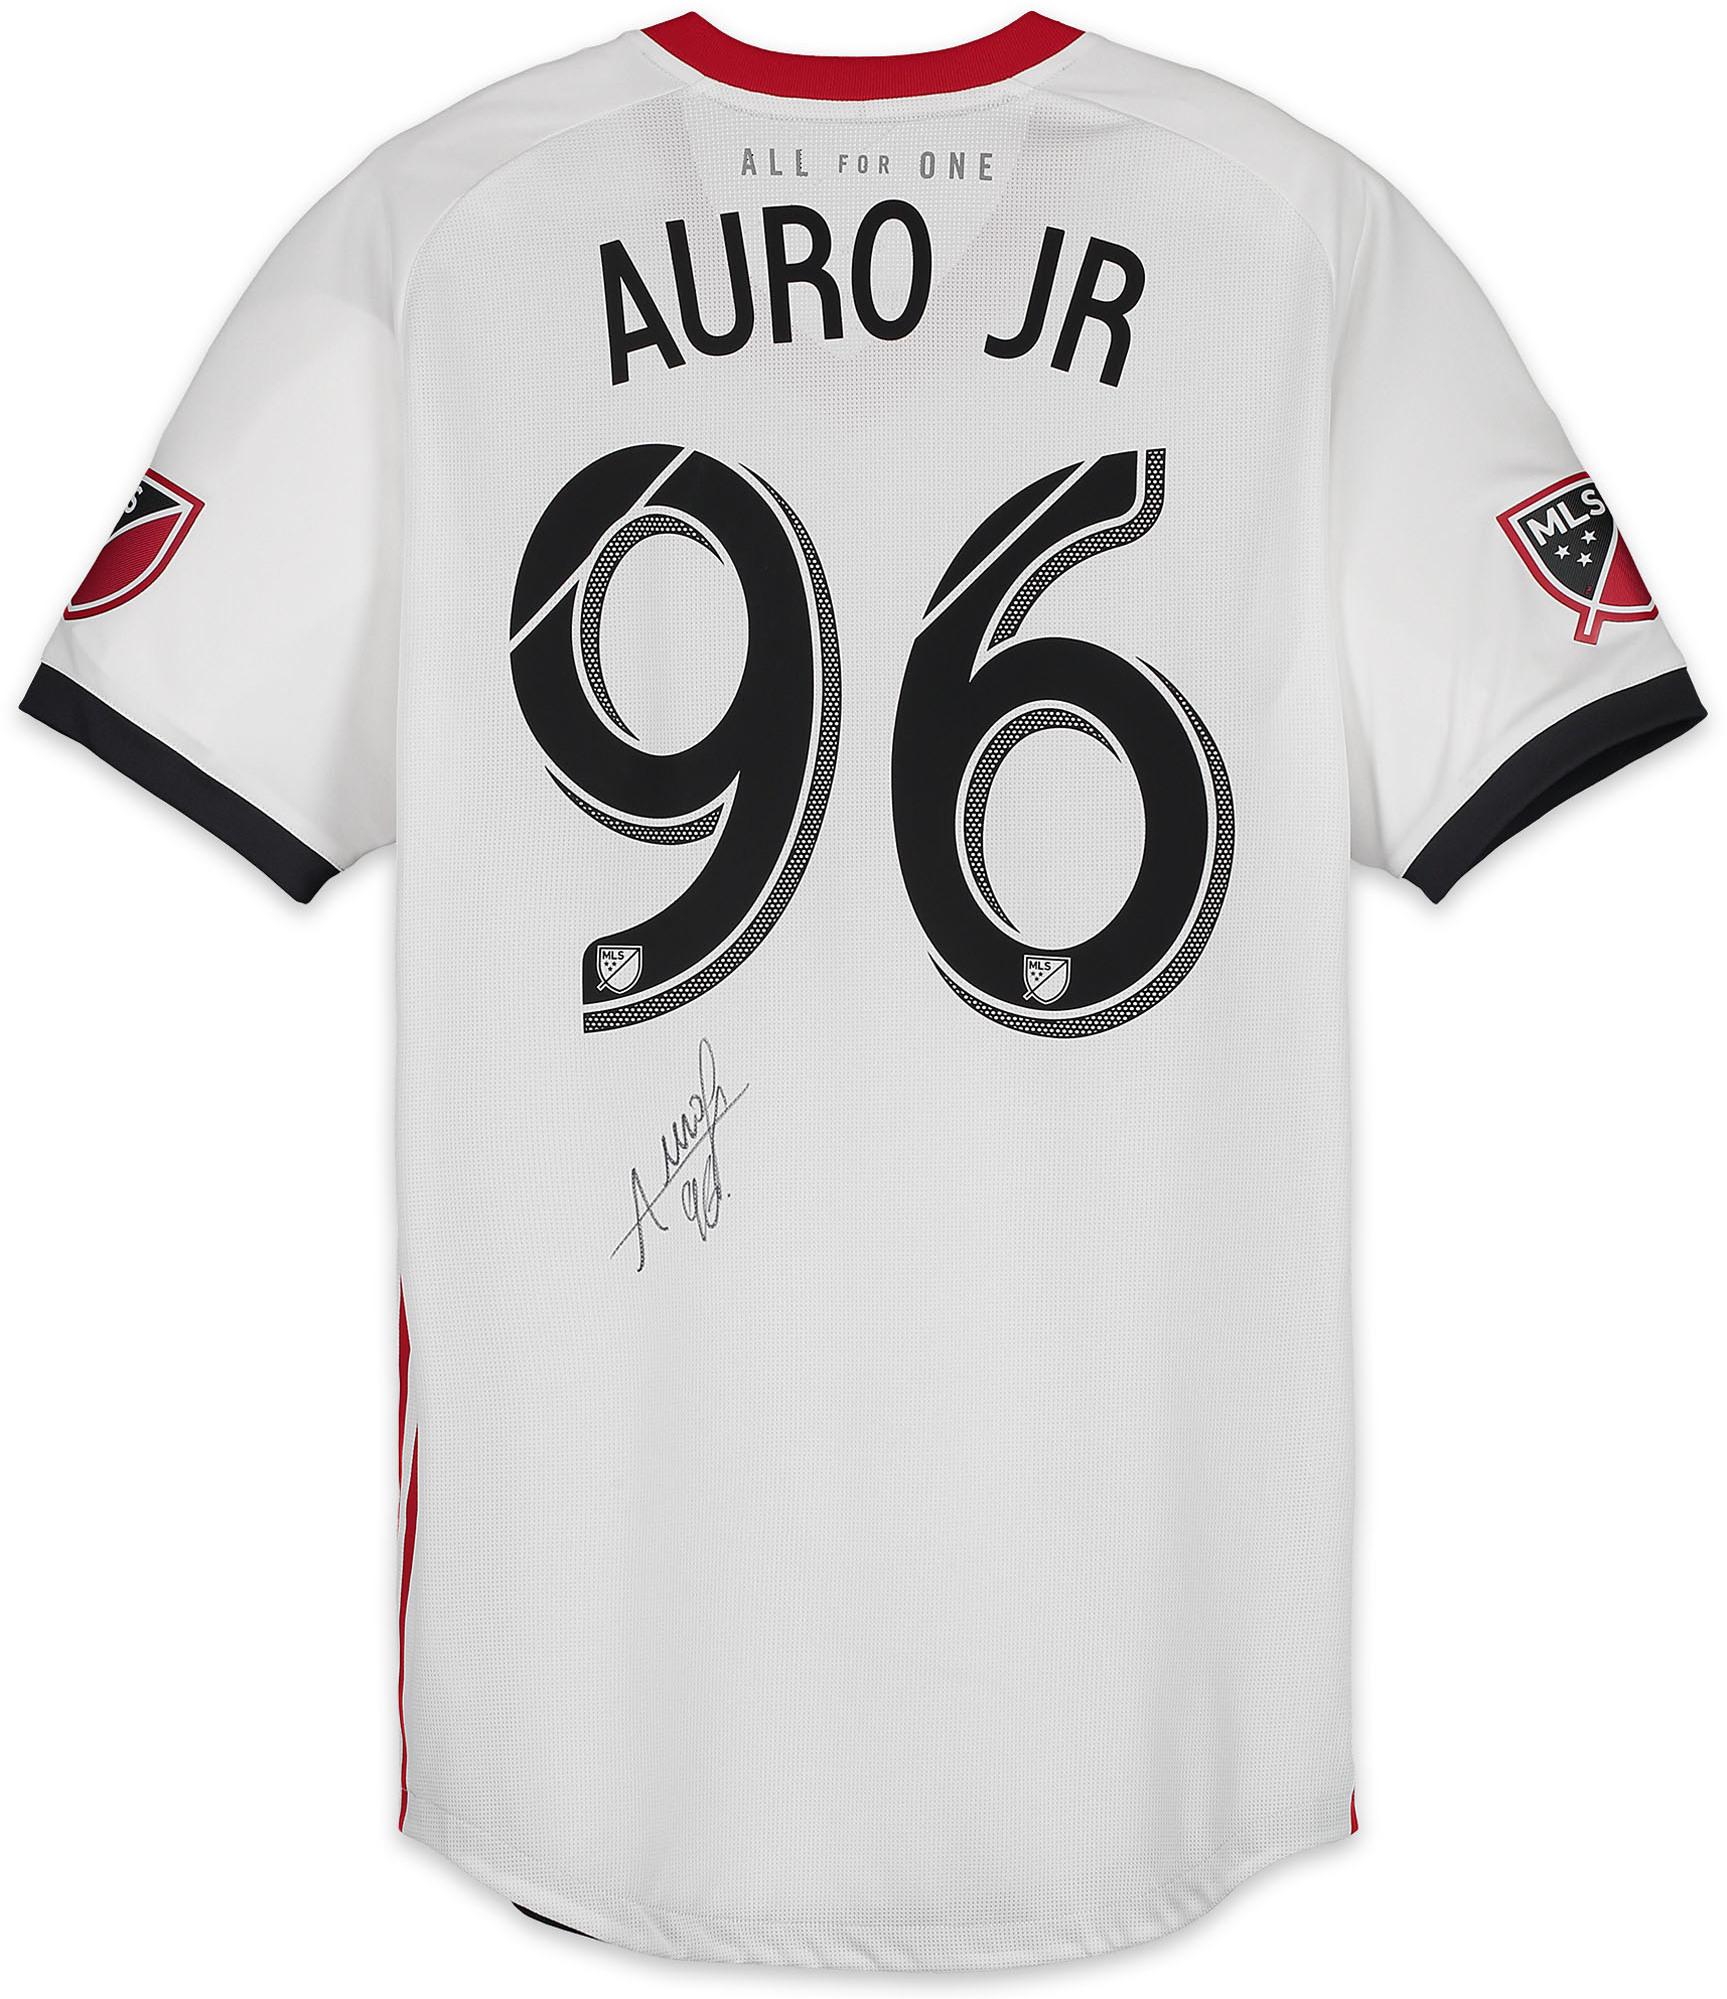 Auro Jr. Toronto FC Autographed Match-Used White #96 Jersey vs. Atlanta United FC on August 4, 2018 - Fanatics Authentic Certified